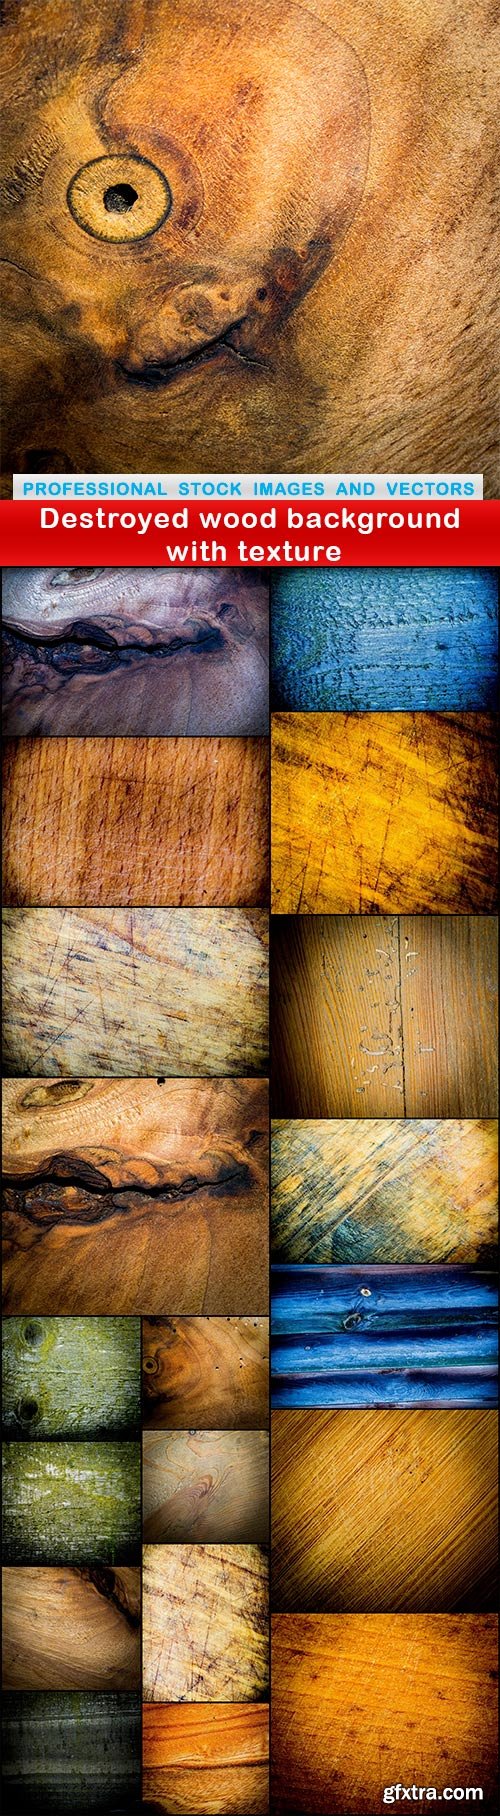 Destroyed wood background with texture - 20 UHQ JPEG